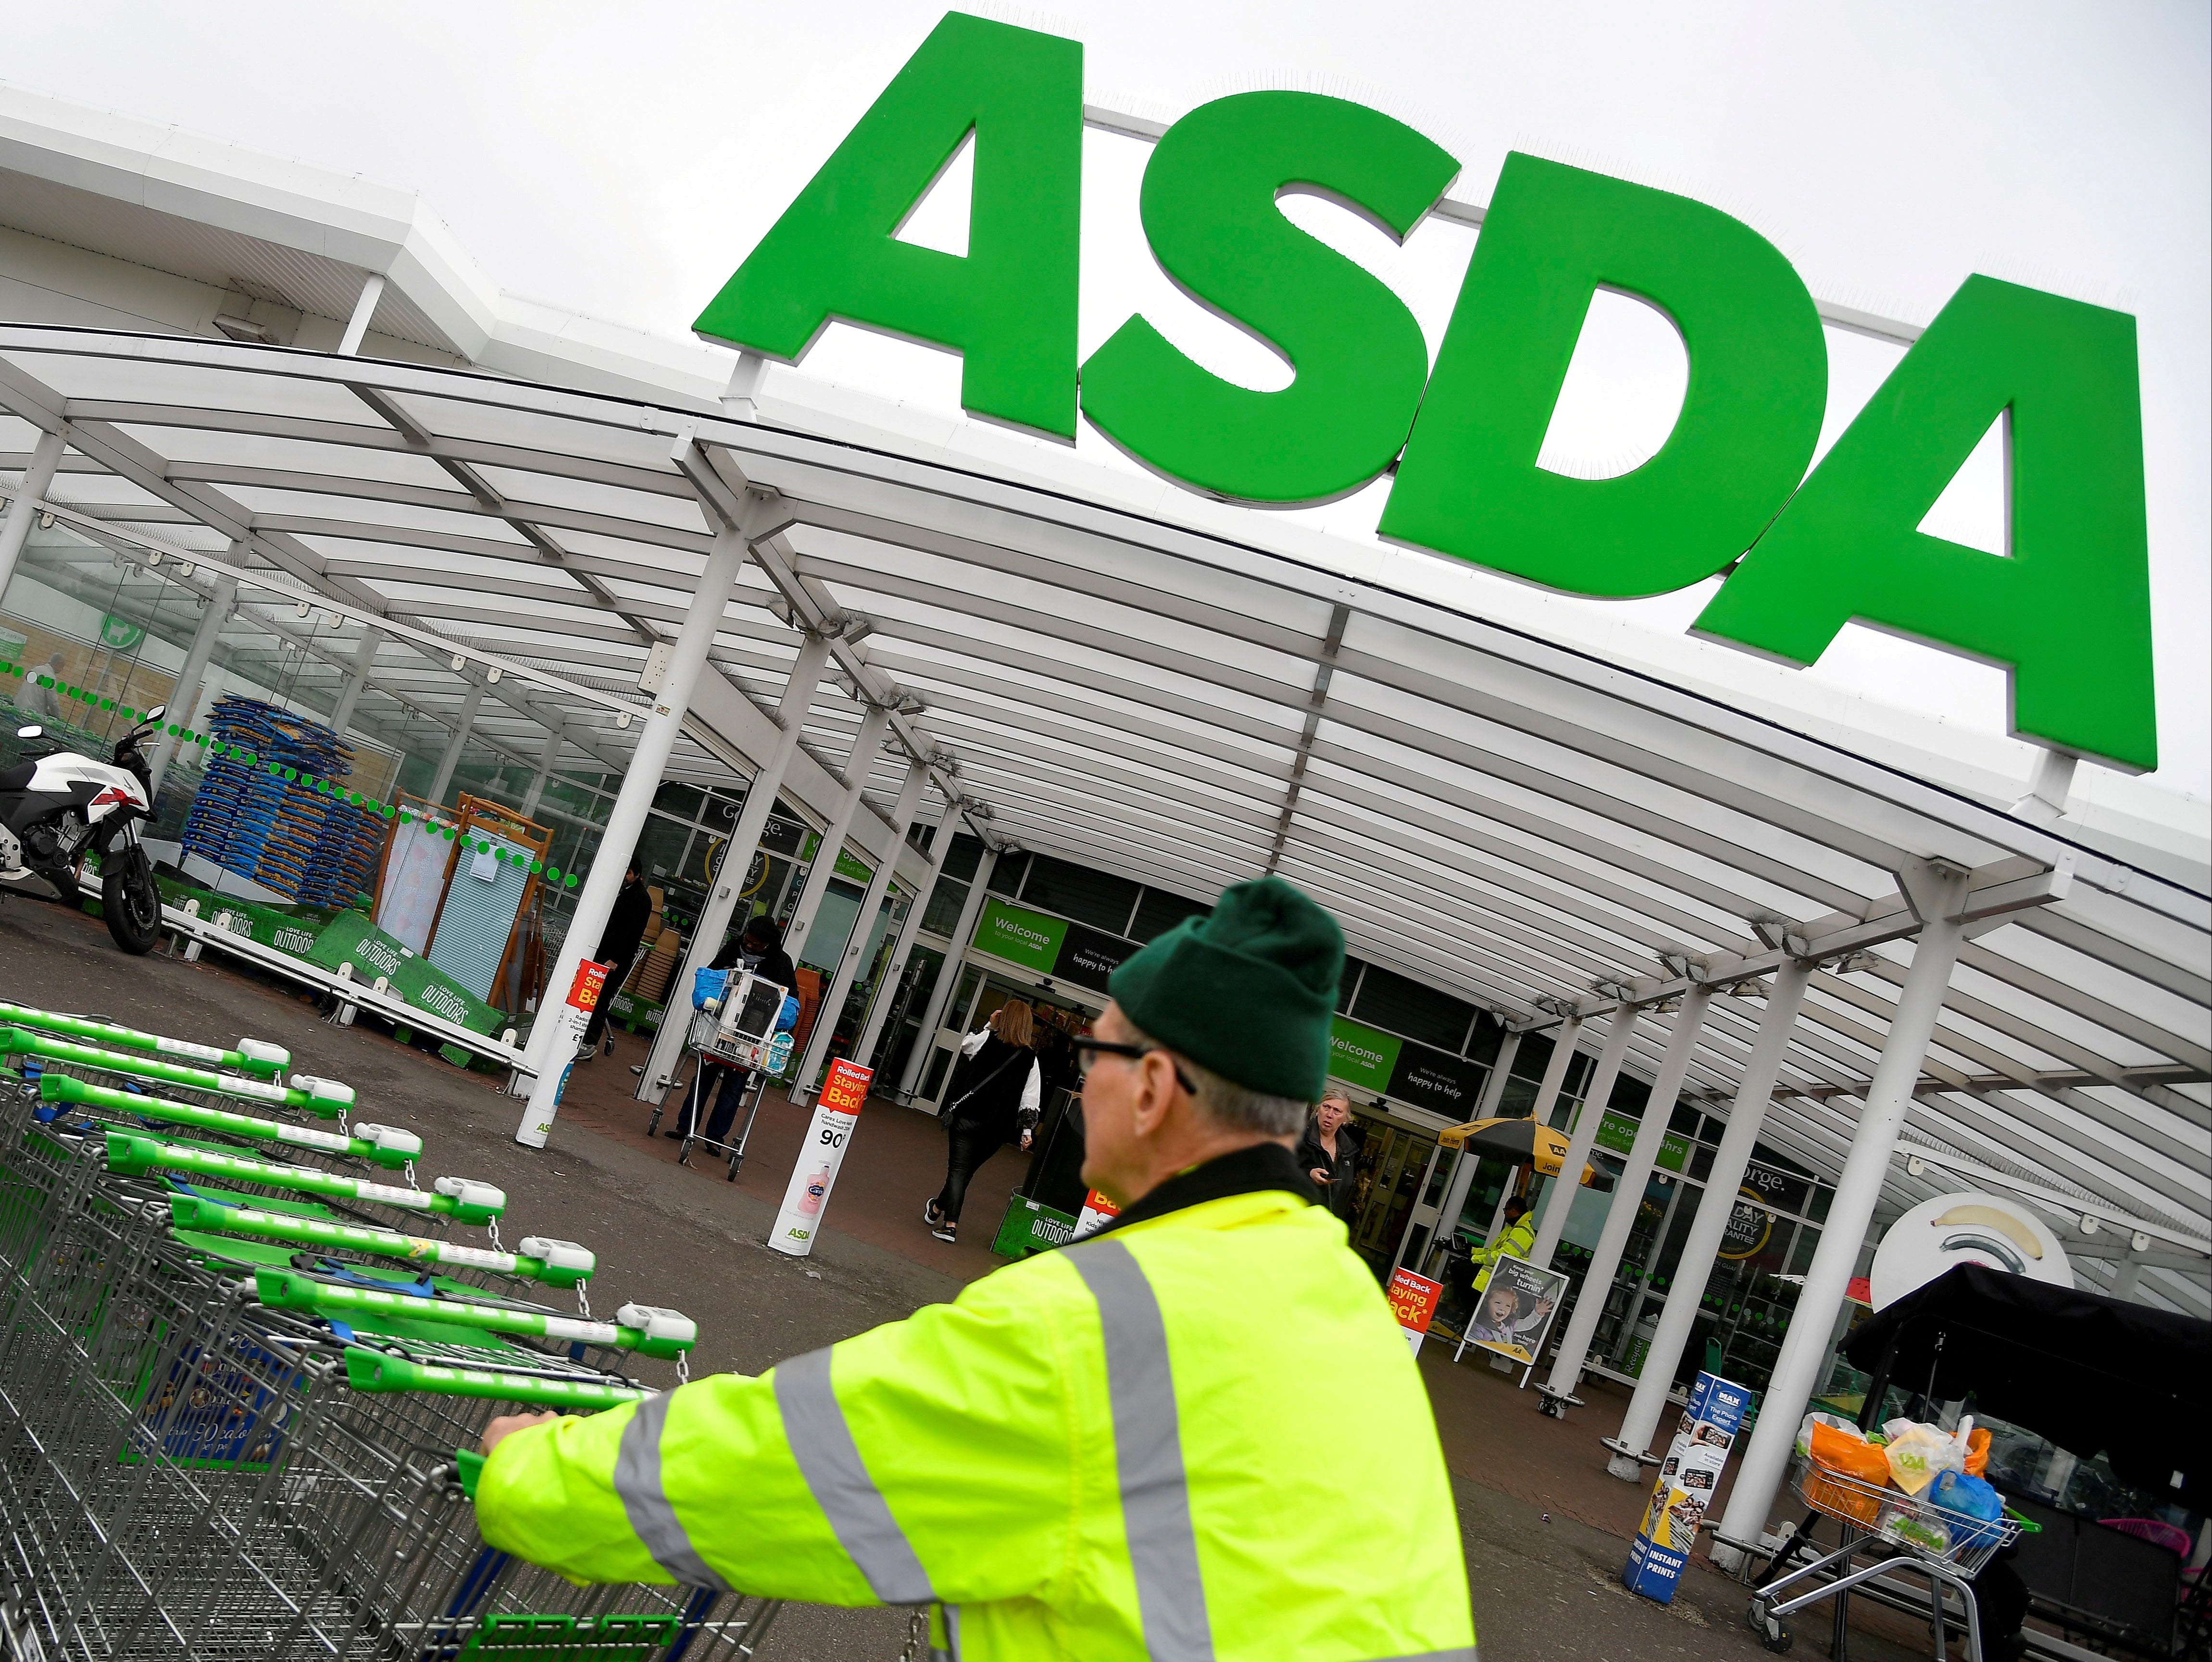 Asda announced consultations earlier this year that could put up to 3,000 jobs at risk